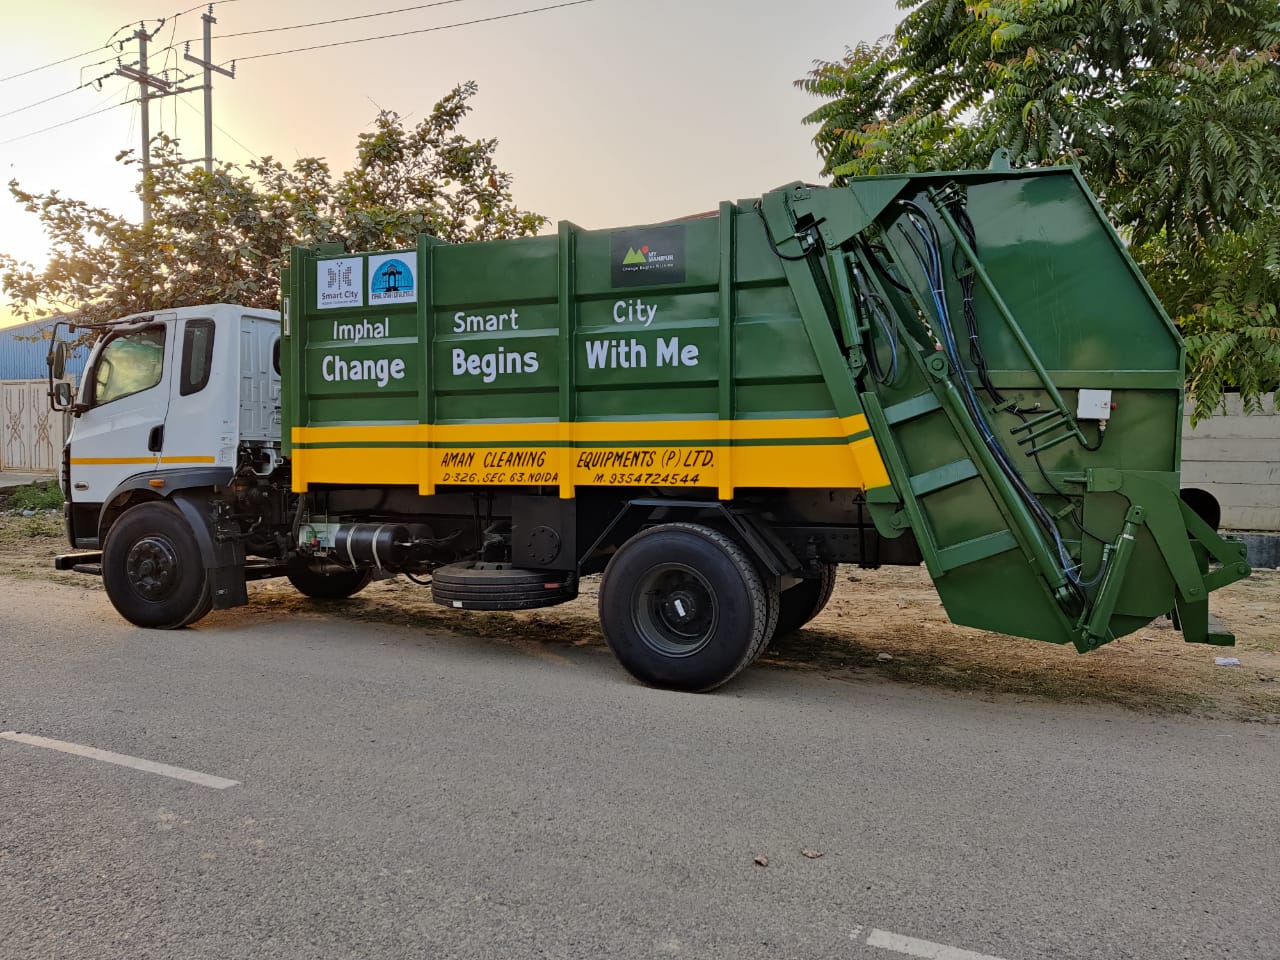 Refuse Compactor Vehicle Mounted on 16 Ton GVW Truck